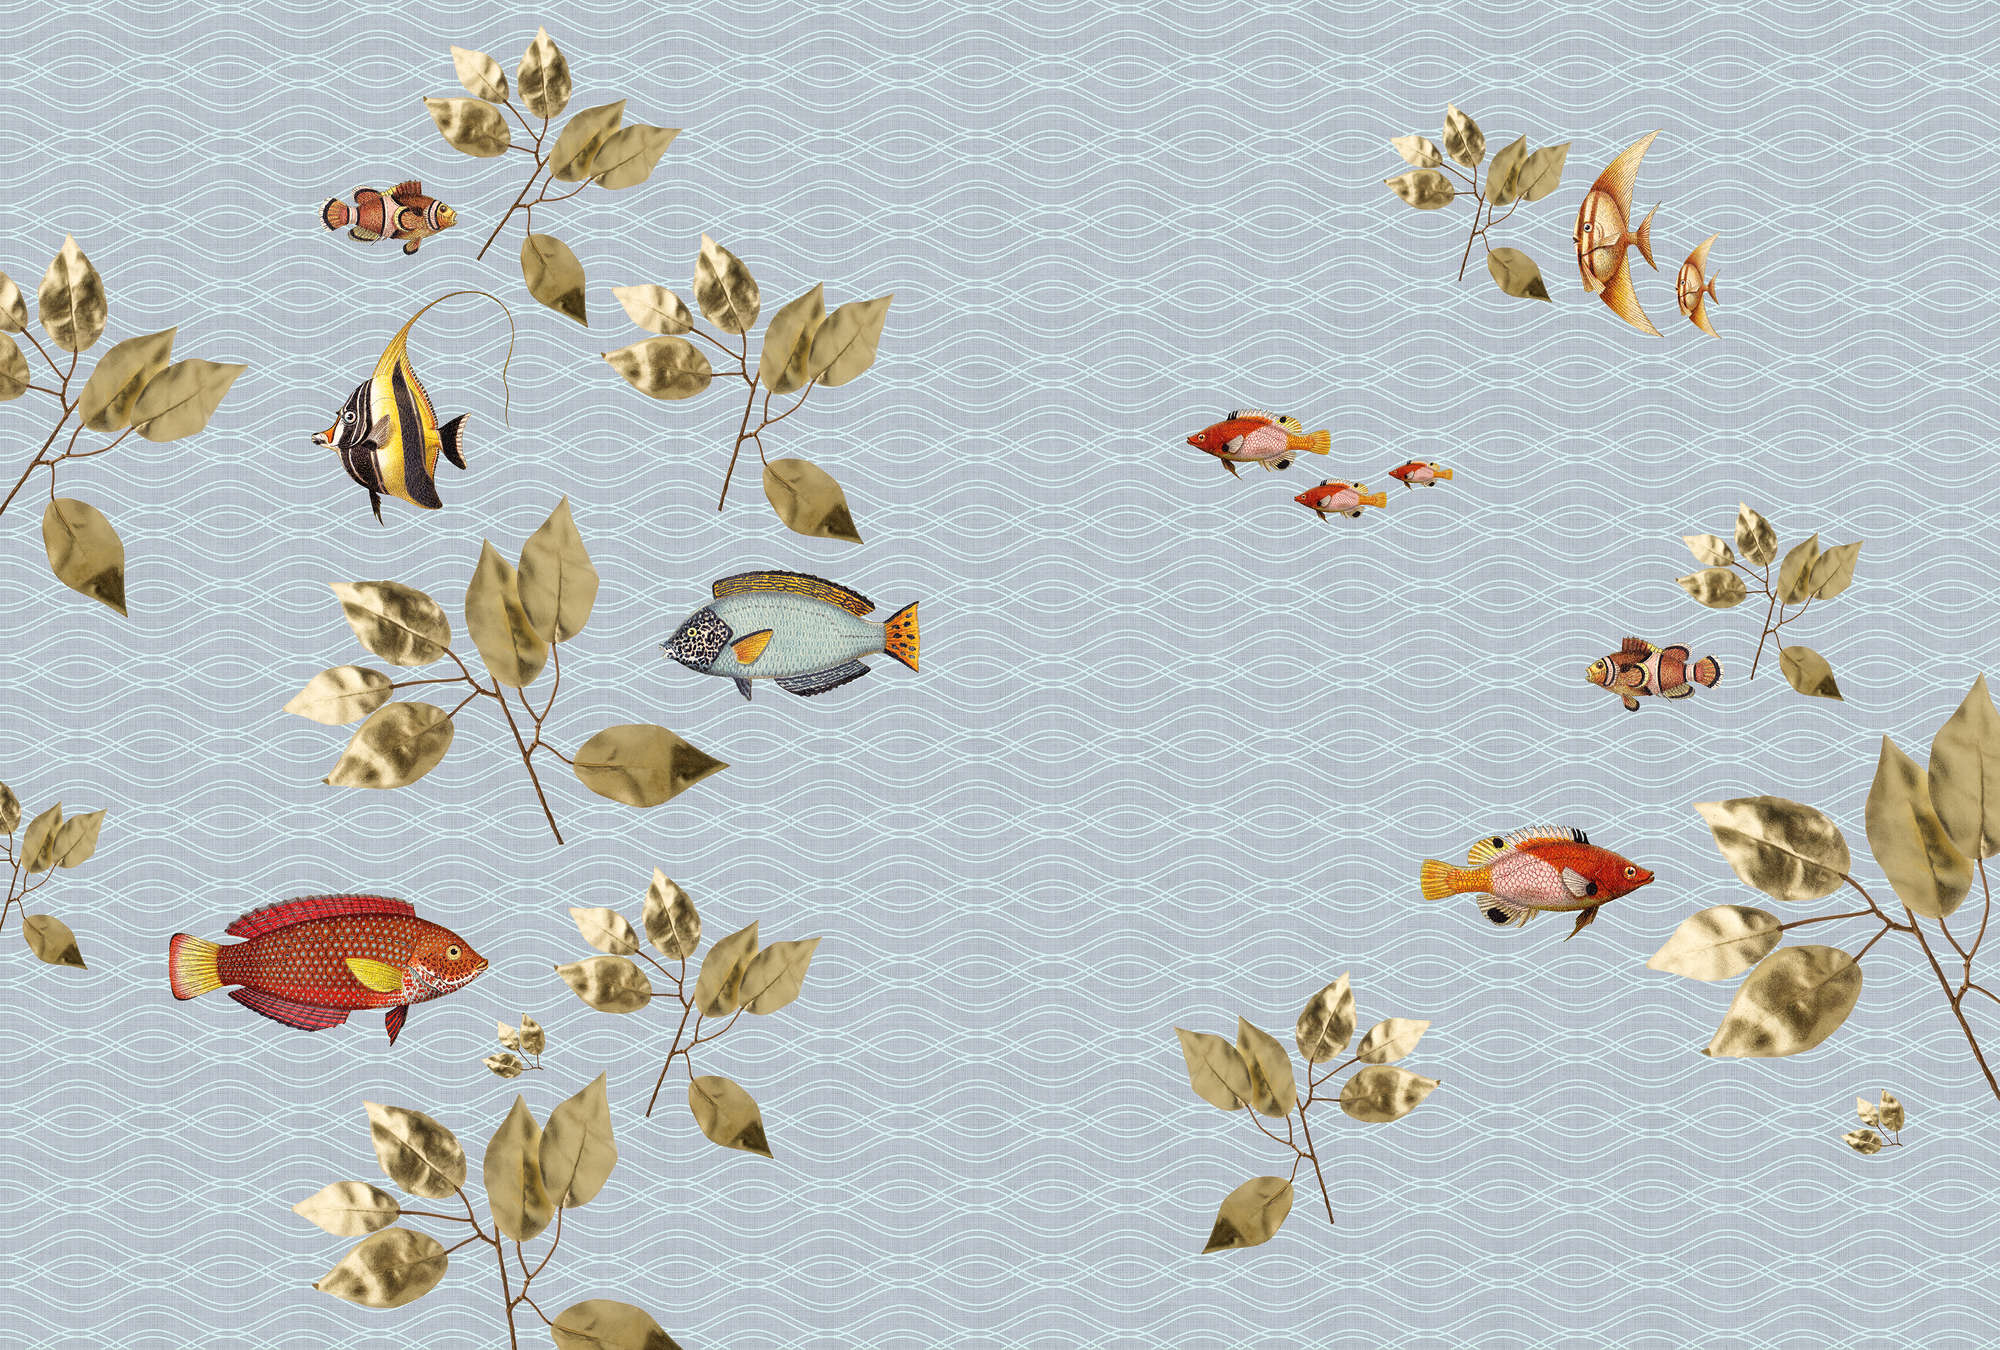             Brilliant fish 1 - Flying fish wallpaper in natural linen structure - Blue | mother-of-pearl smooth fleece
        